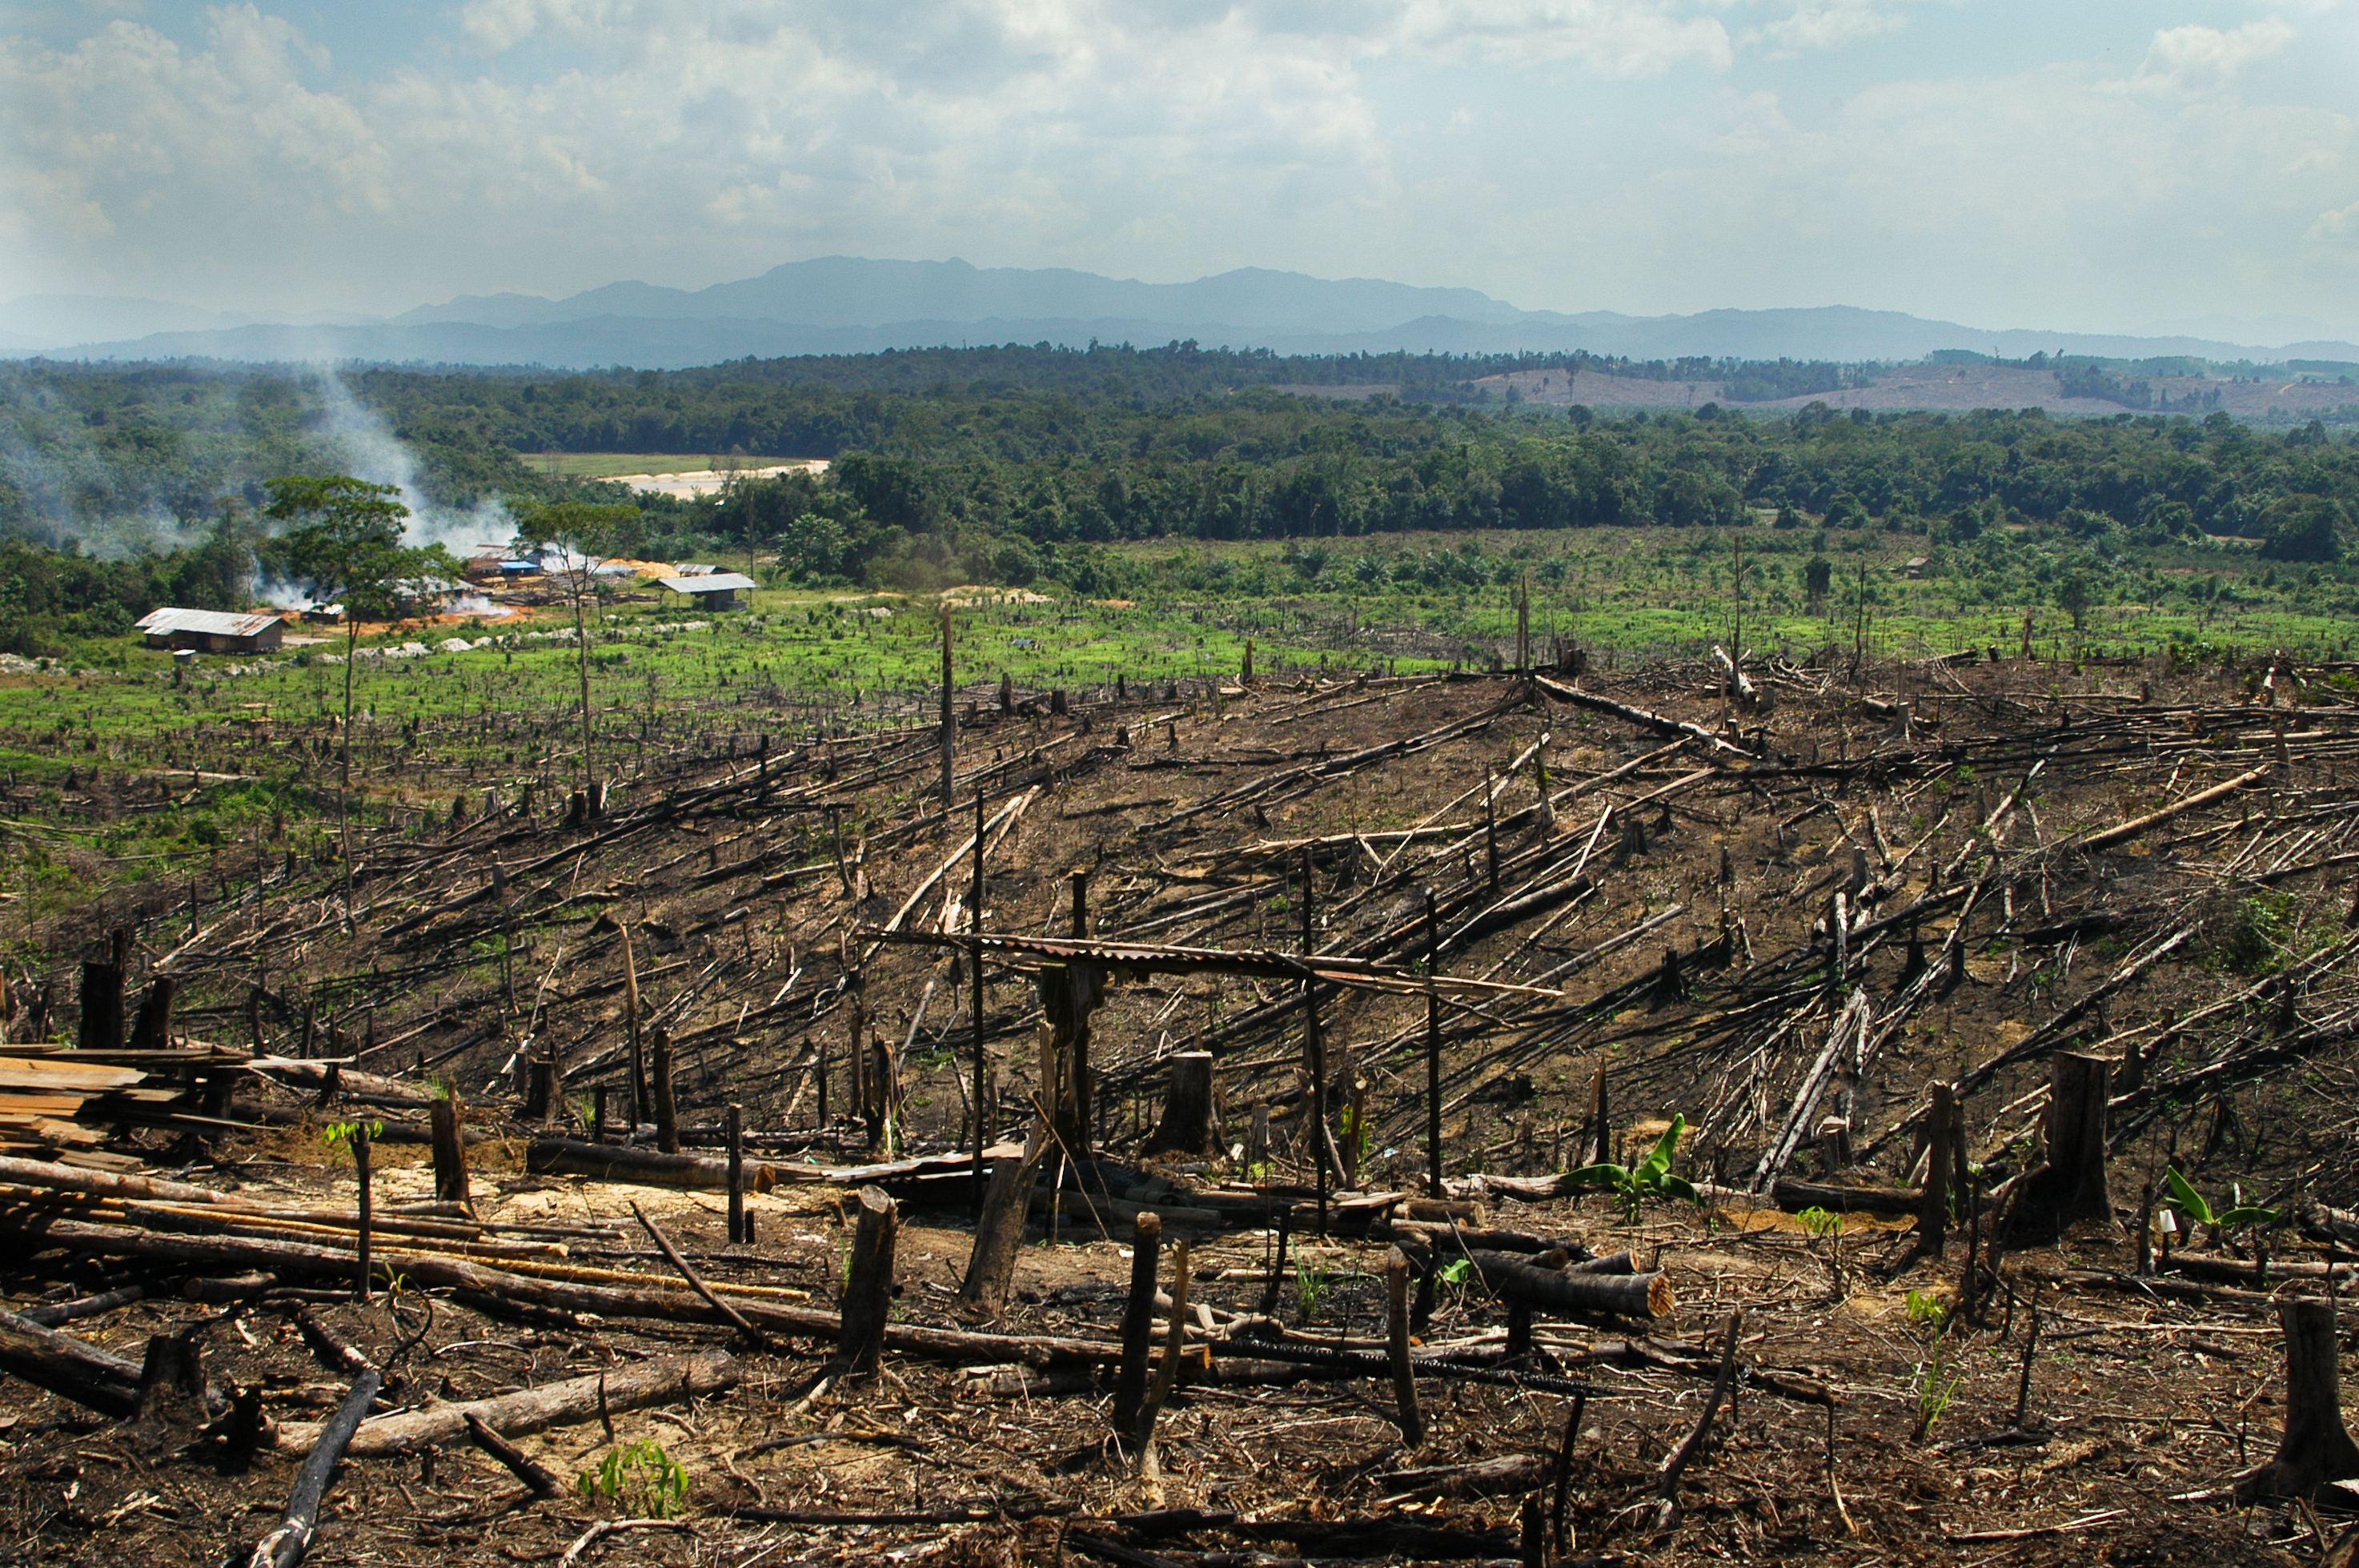 Burning rainforest on Sumatra to make space for palm oil plantations